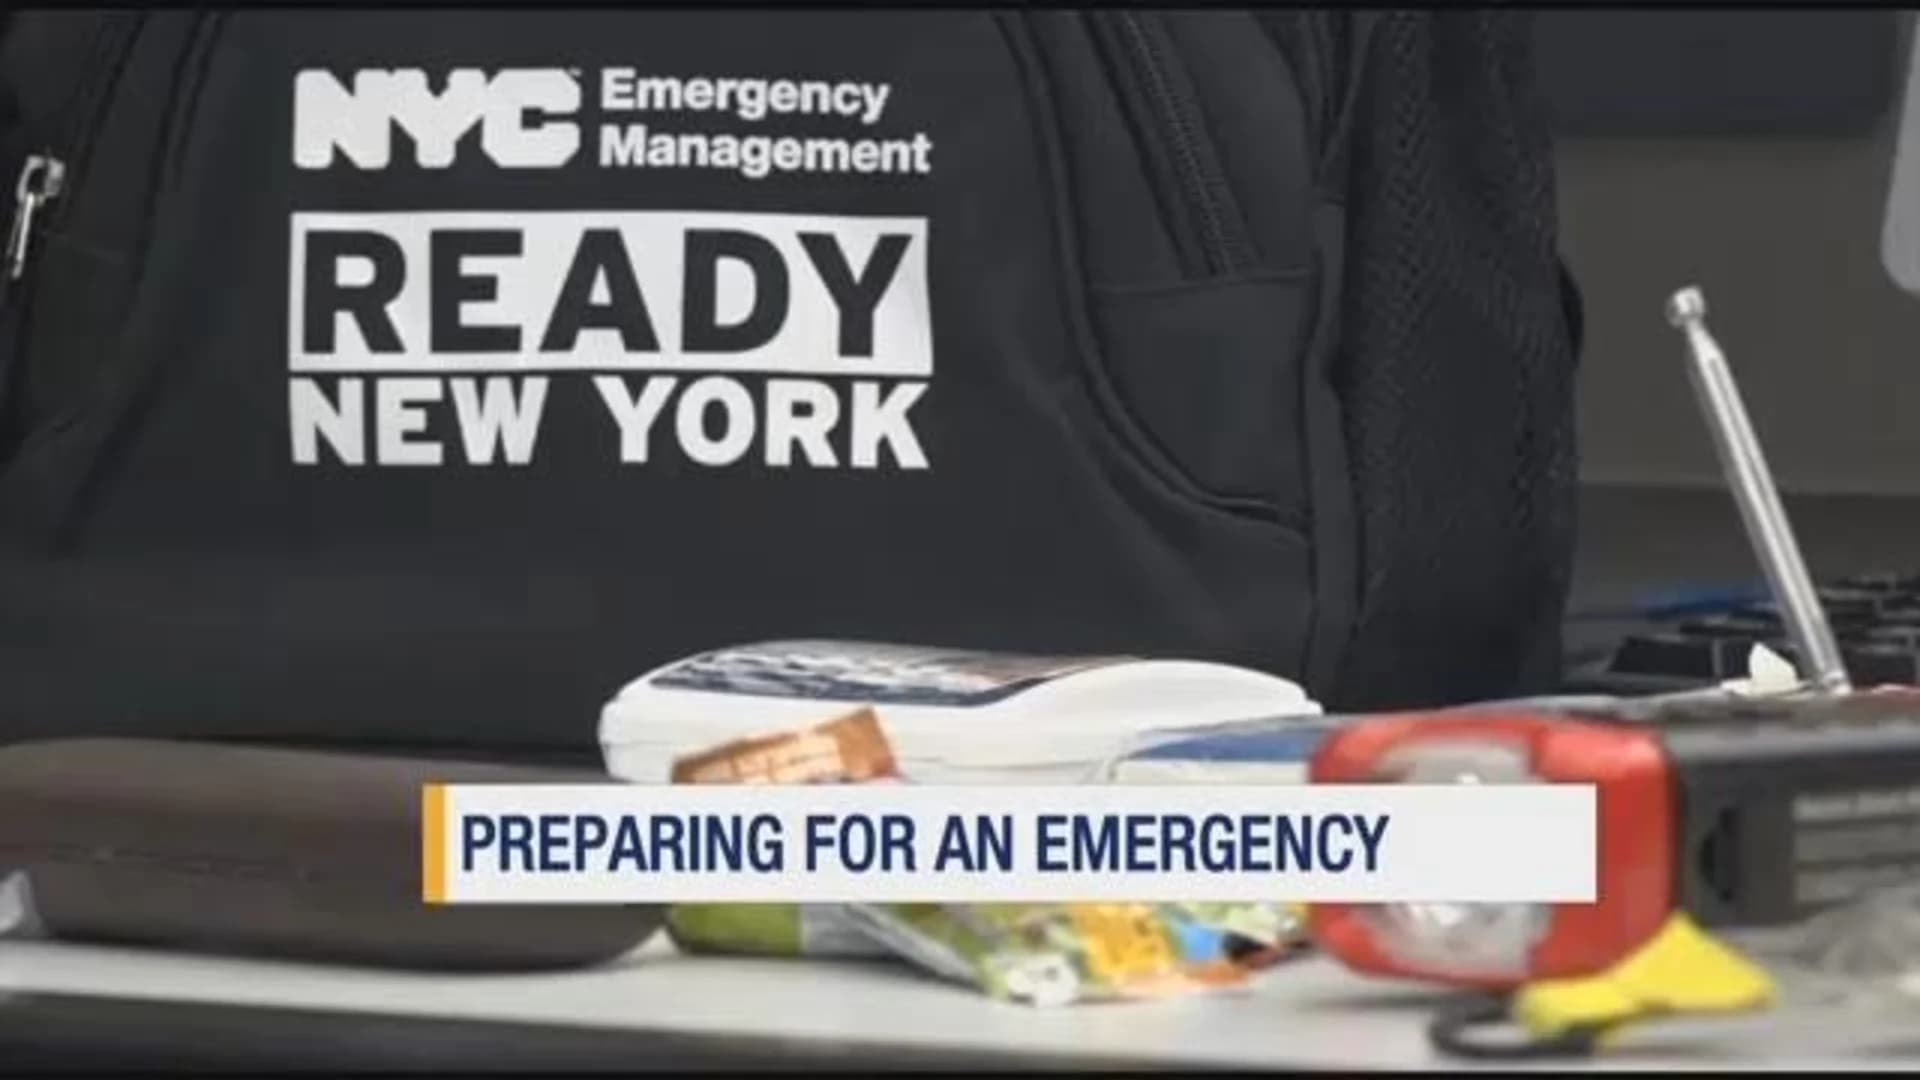 City urges residents to prepare for weather emergencies